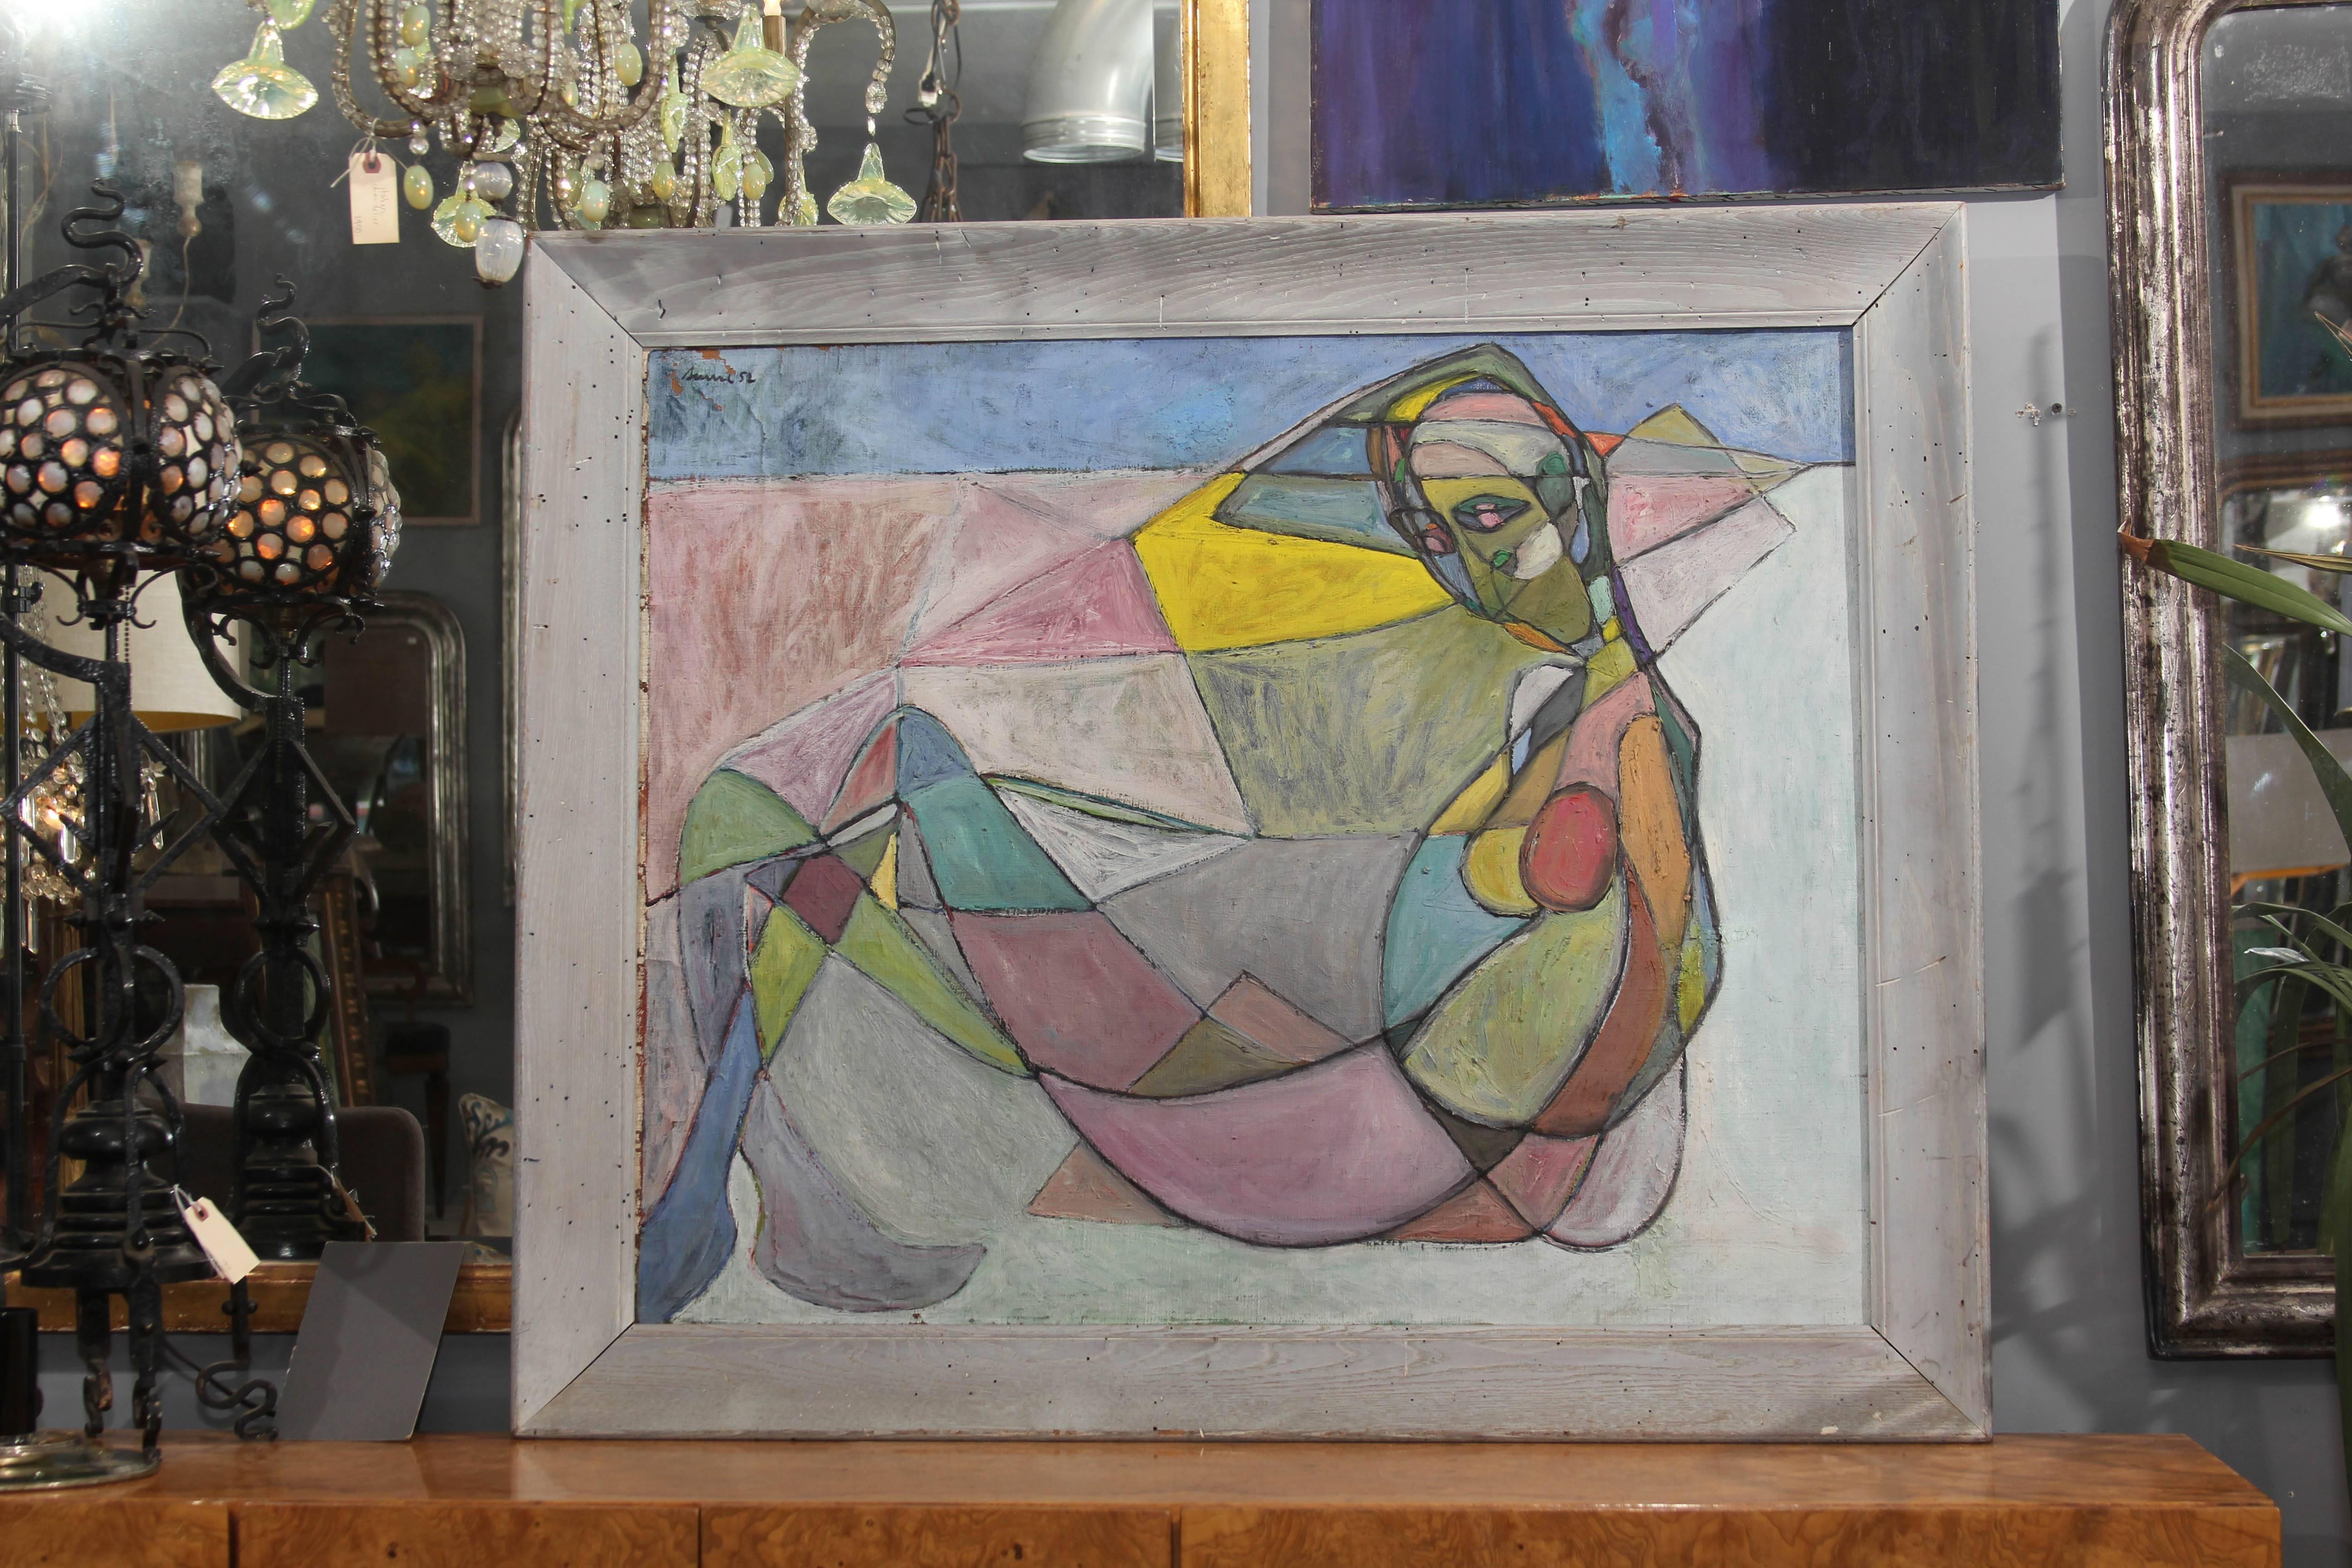 Large, powerful abstract as found in original frame. Great color and form.